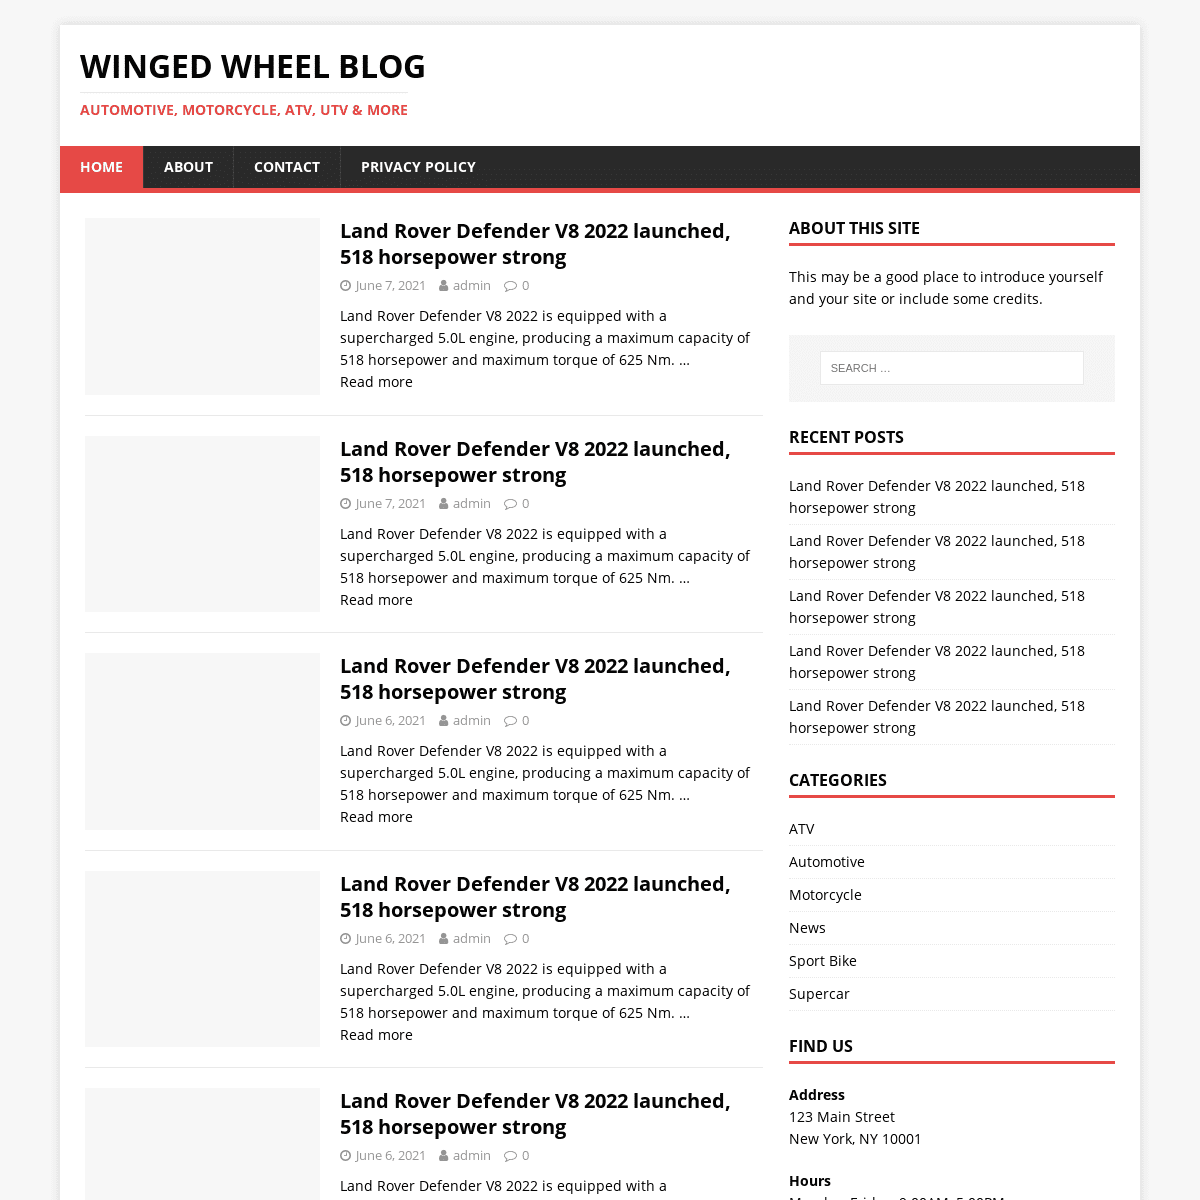 A complete backup of https://wingedwheelblog.com